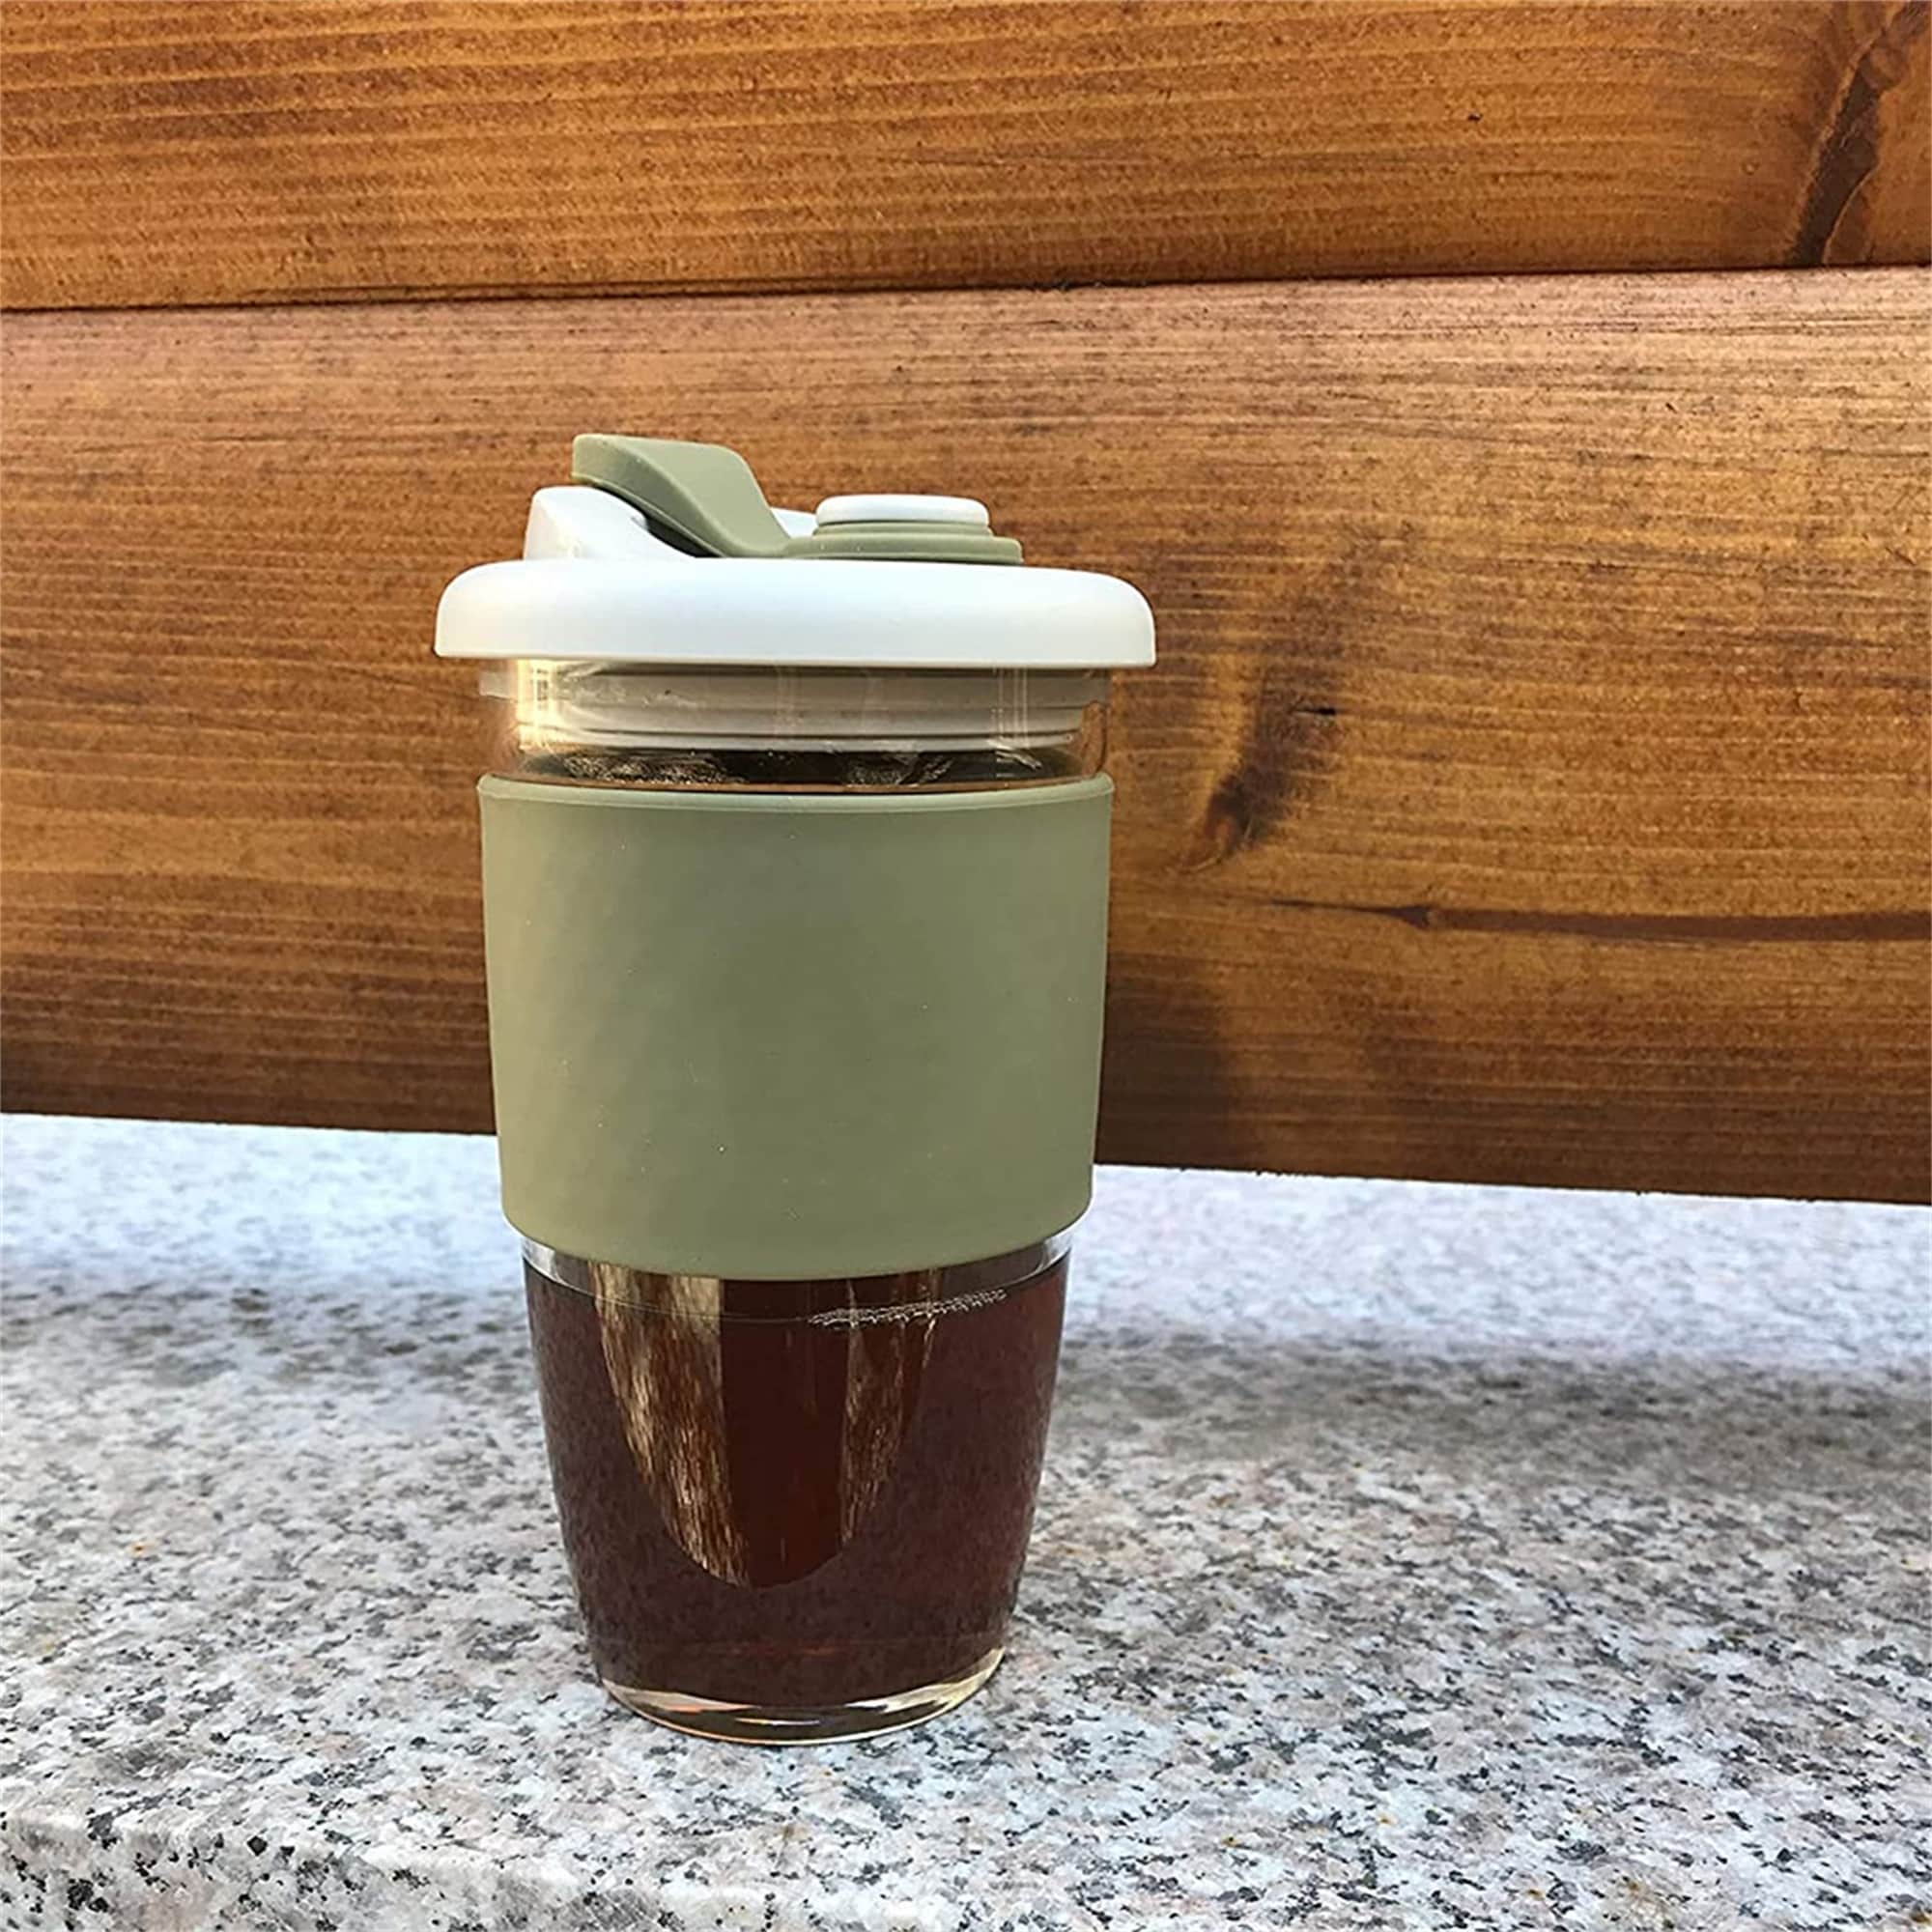 https://ak1.ostkcdn.com/images/products/is/images/direct/df2730ef4690a1f91be296a27ffb25e0ae8c359a/The-Reusable-Glass-Coffee-Cup%2C-ToGo-Travel-Coffee-Mug-with-Lid-and-Silicone-Sleeve%2C-Dishwasher-and-Microwave-Safe.jpg